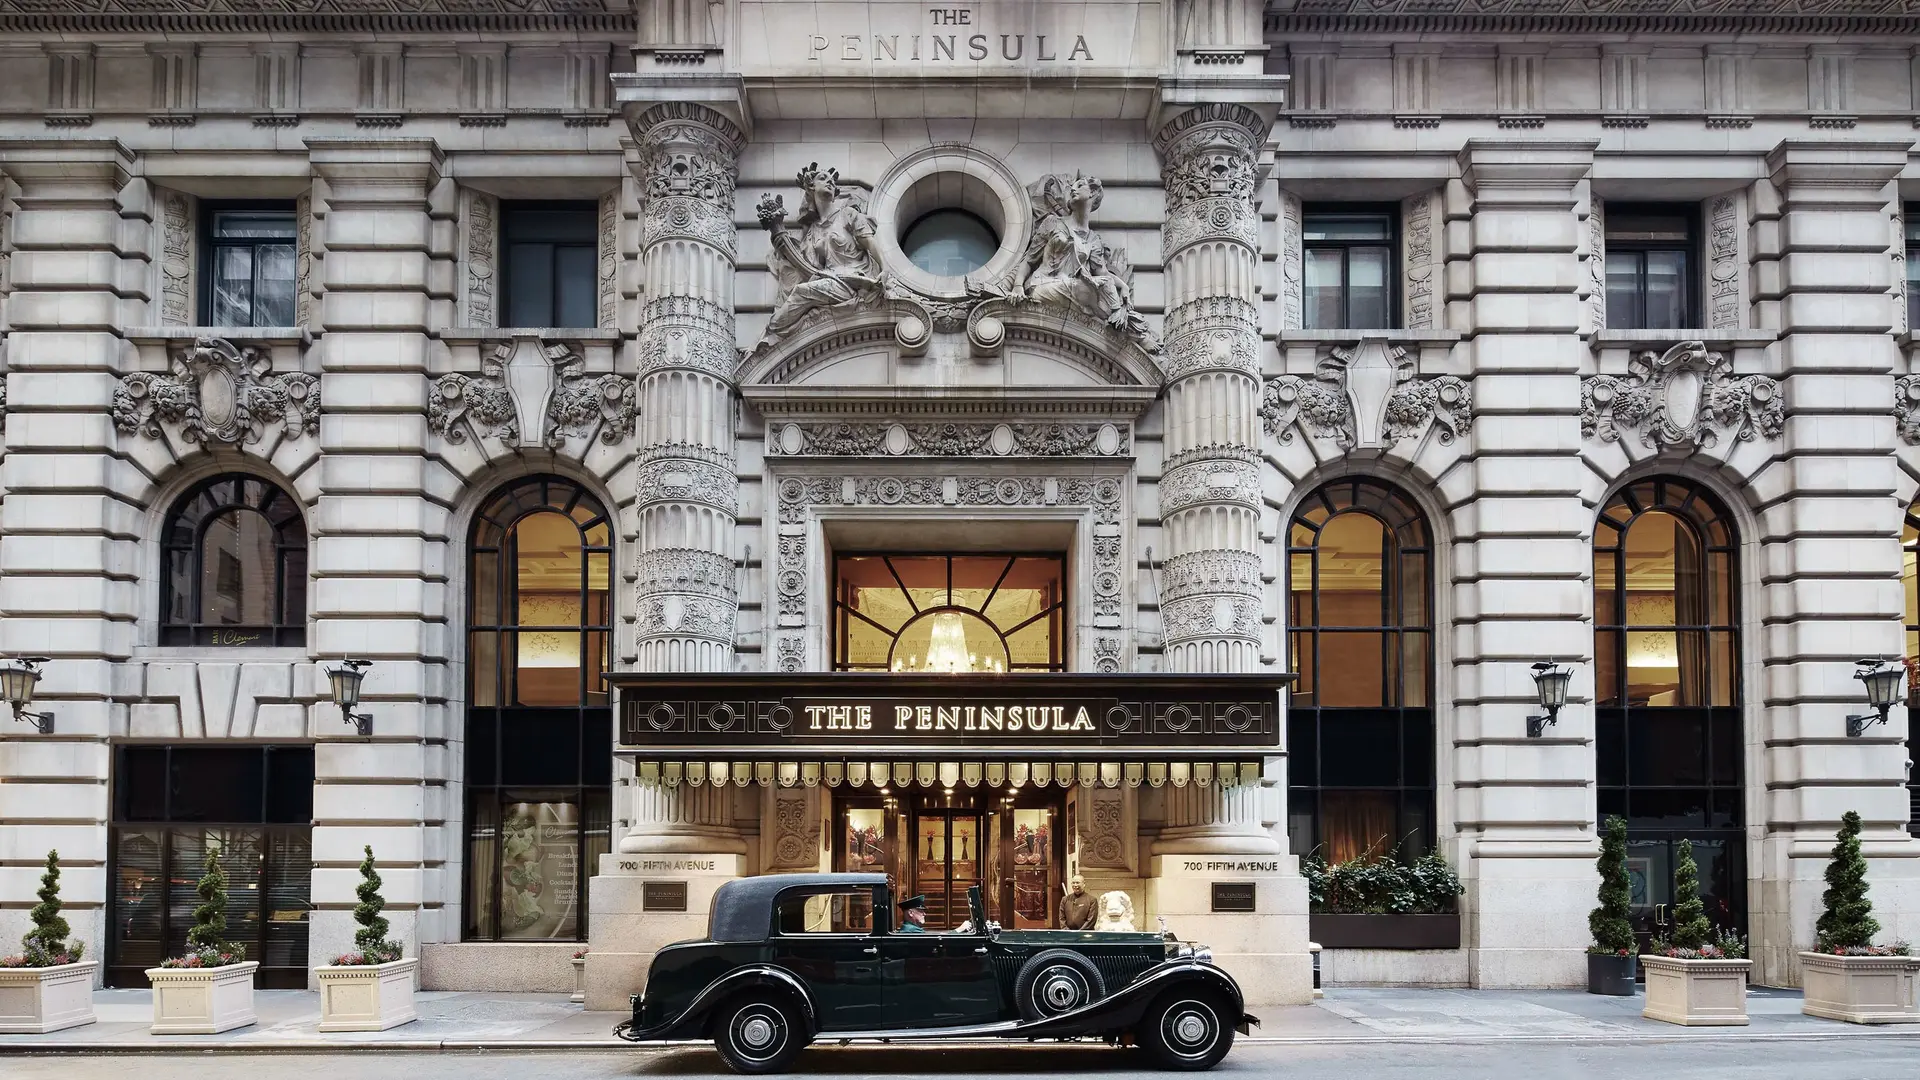 Hotels Toplists - The Best Luxury Hotels In New York